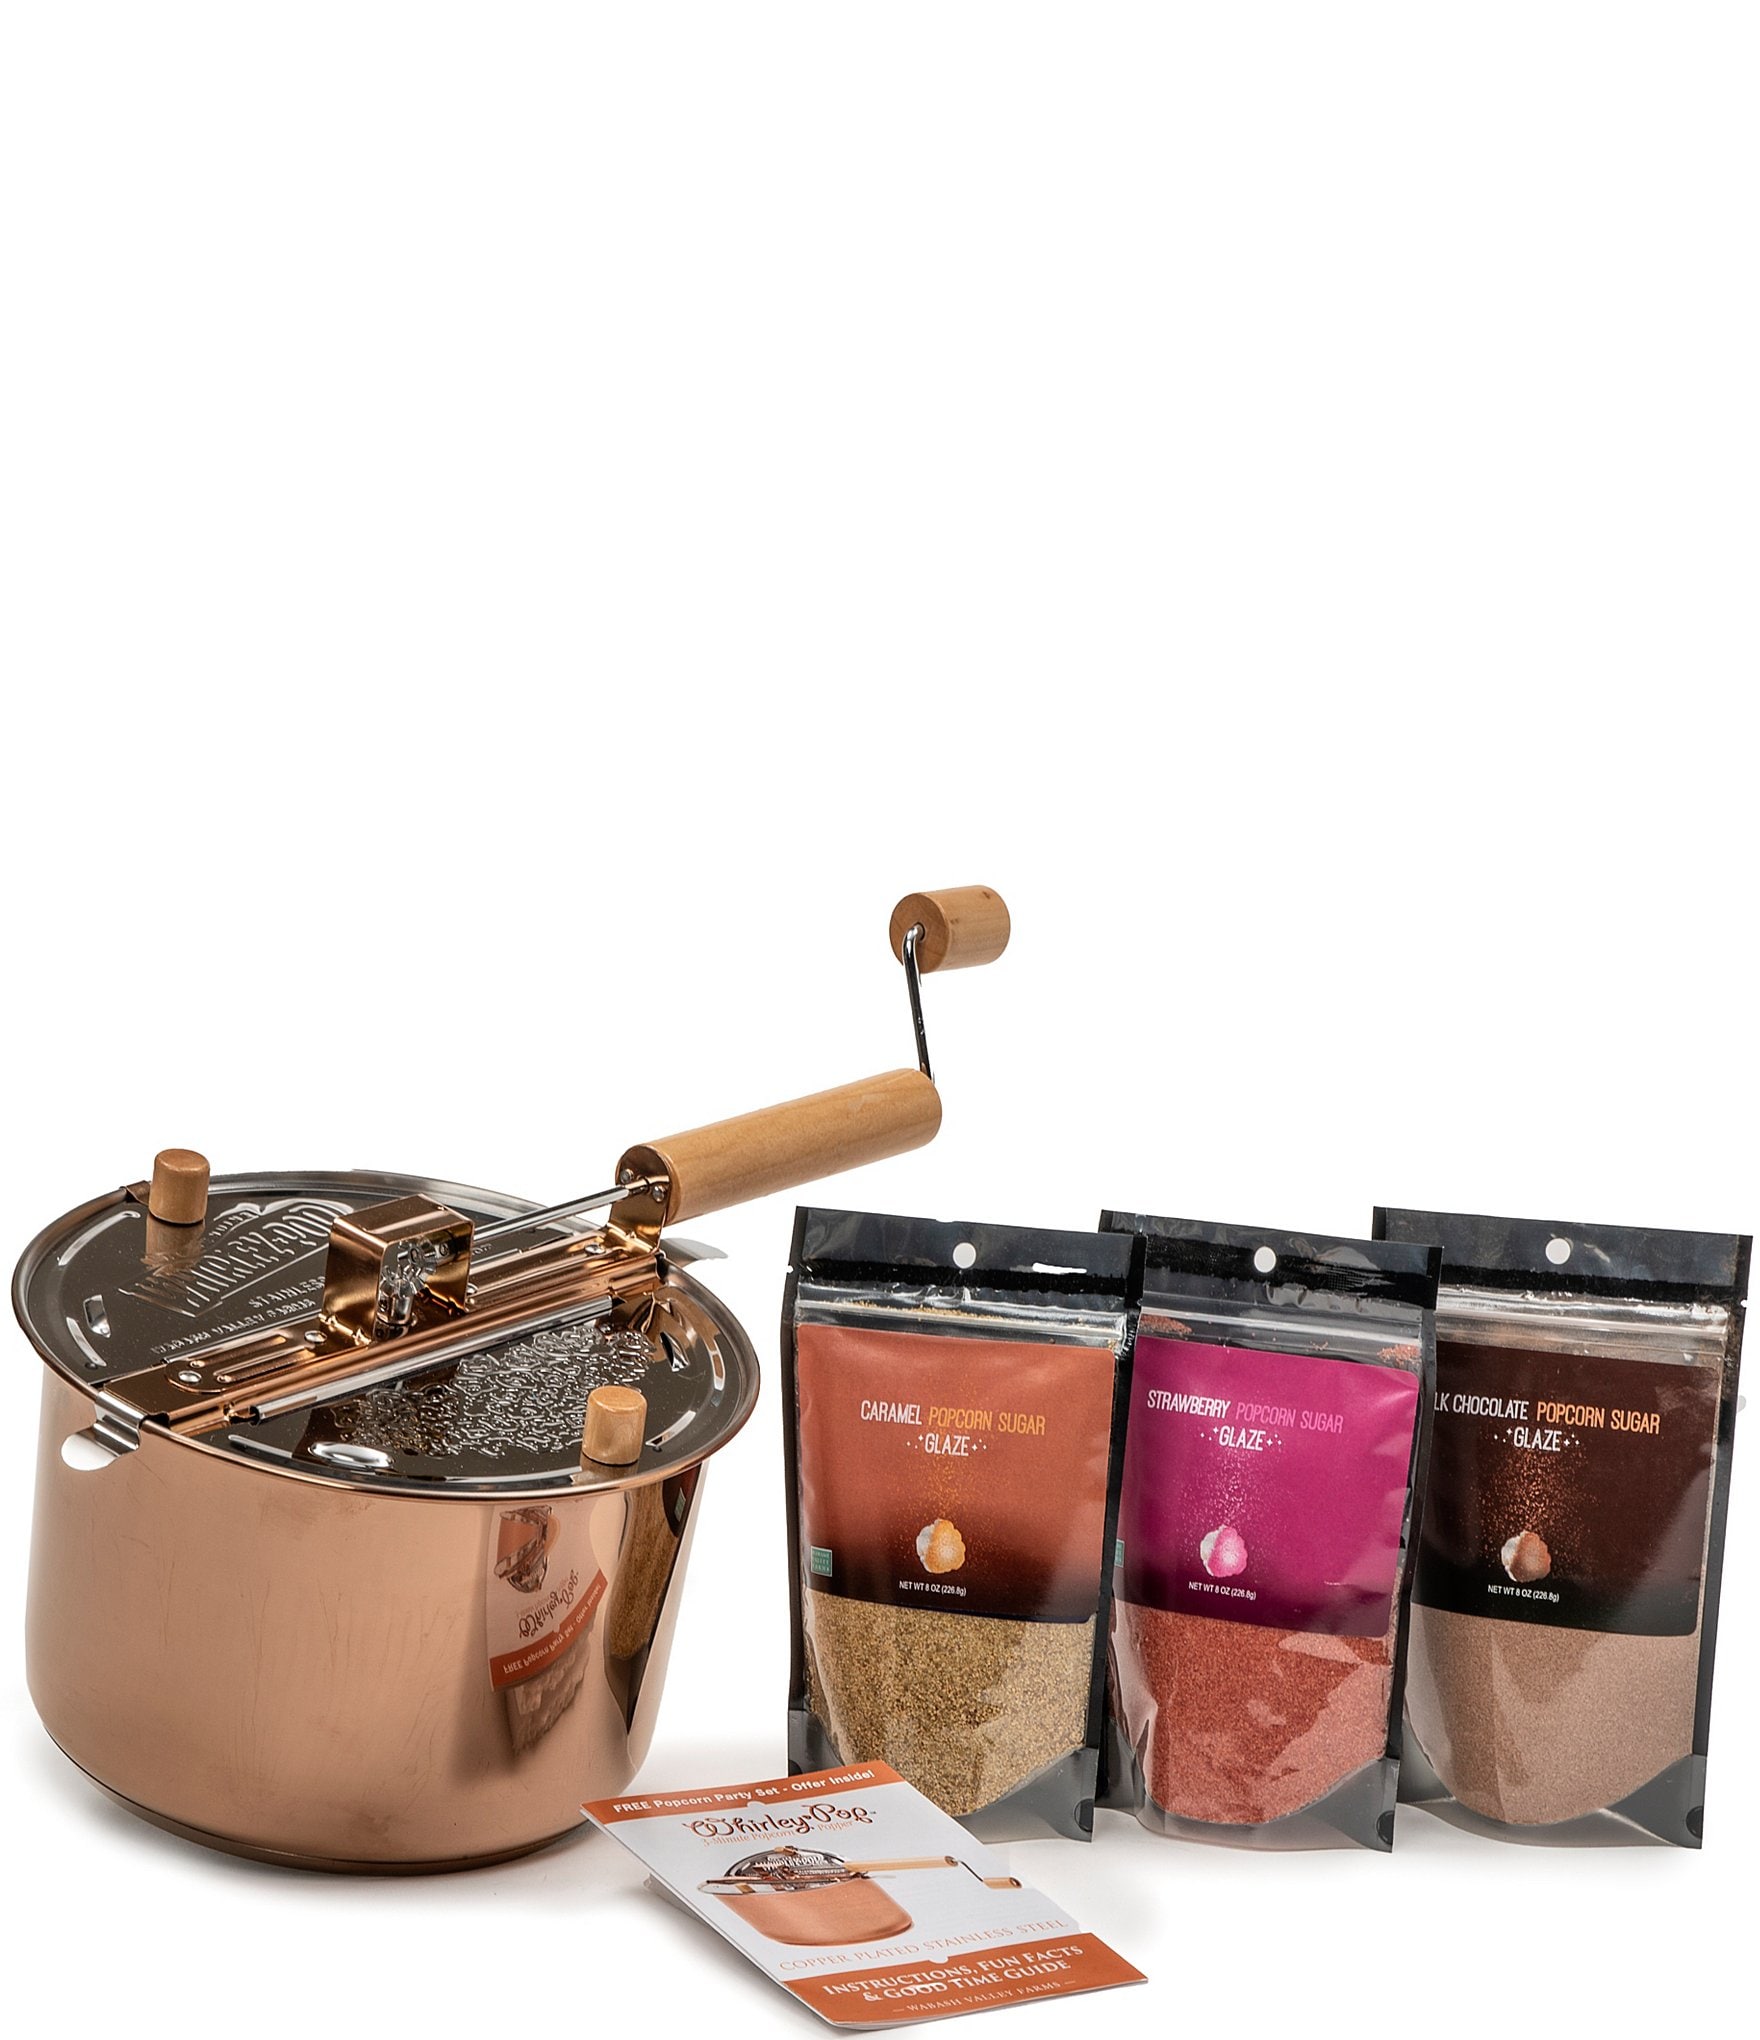 Wabash Valley Farms Farm Fresh Copper Plated Whirley Pop Popcorn Set, 3  Pieces